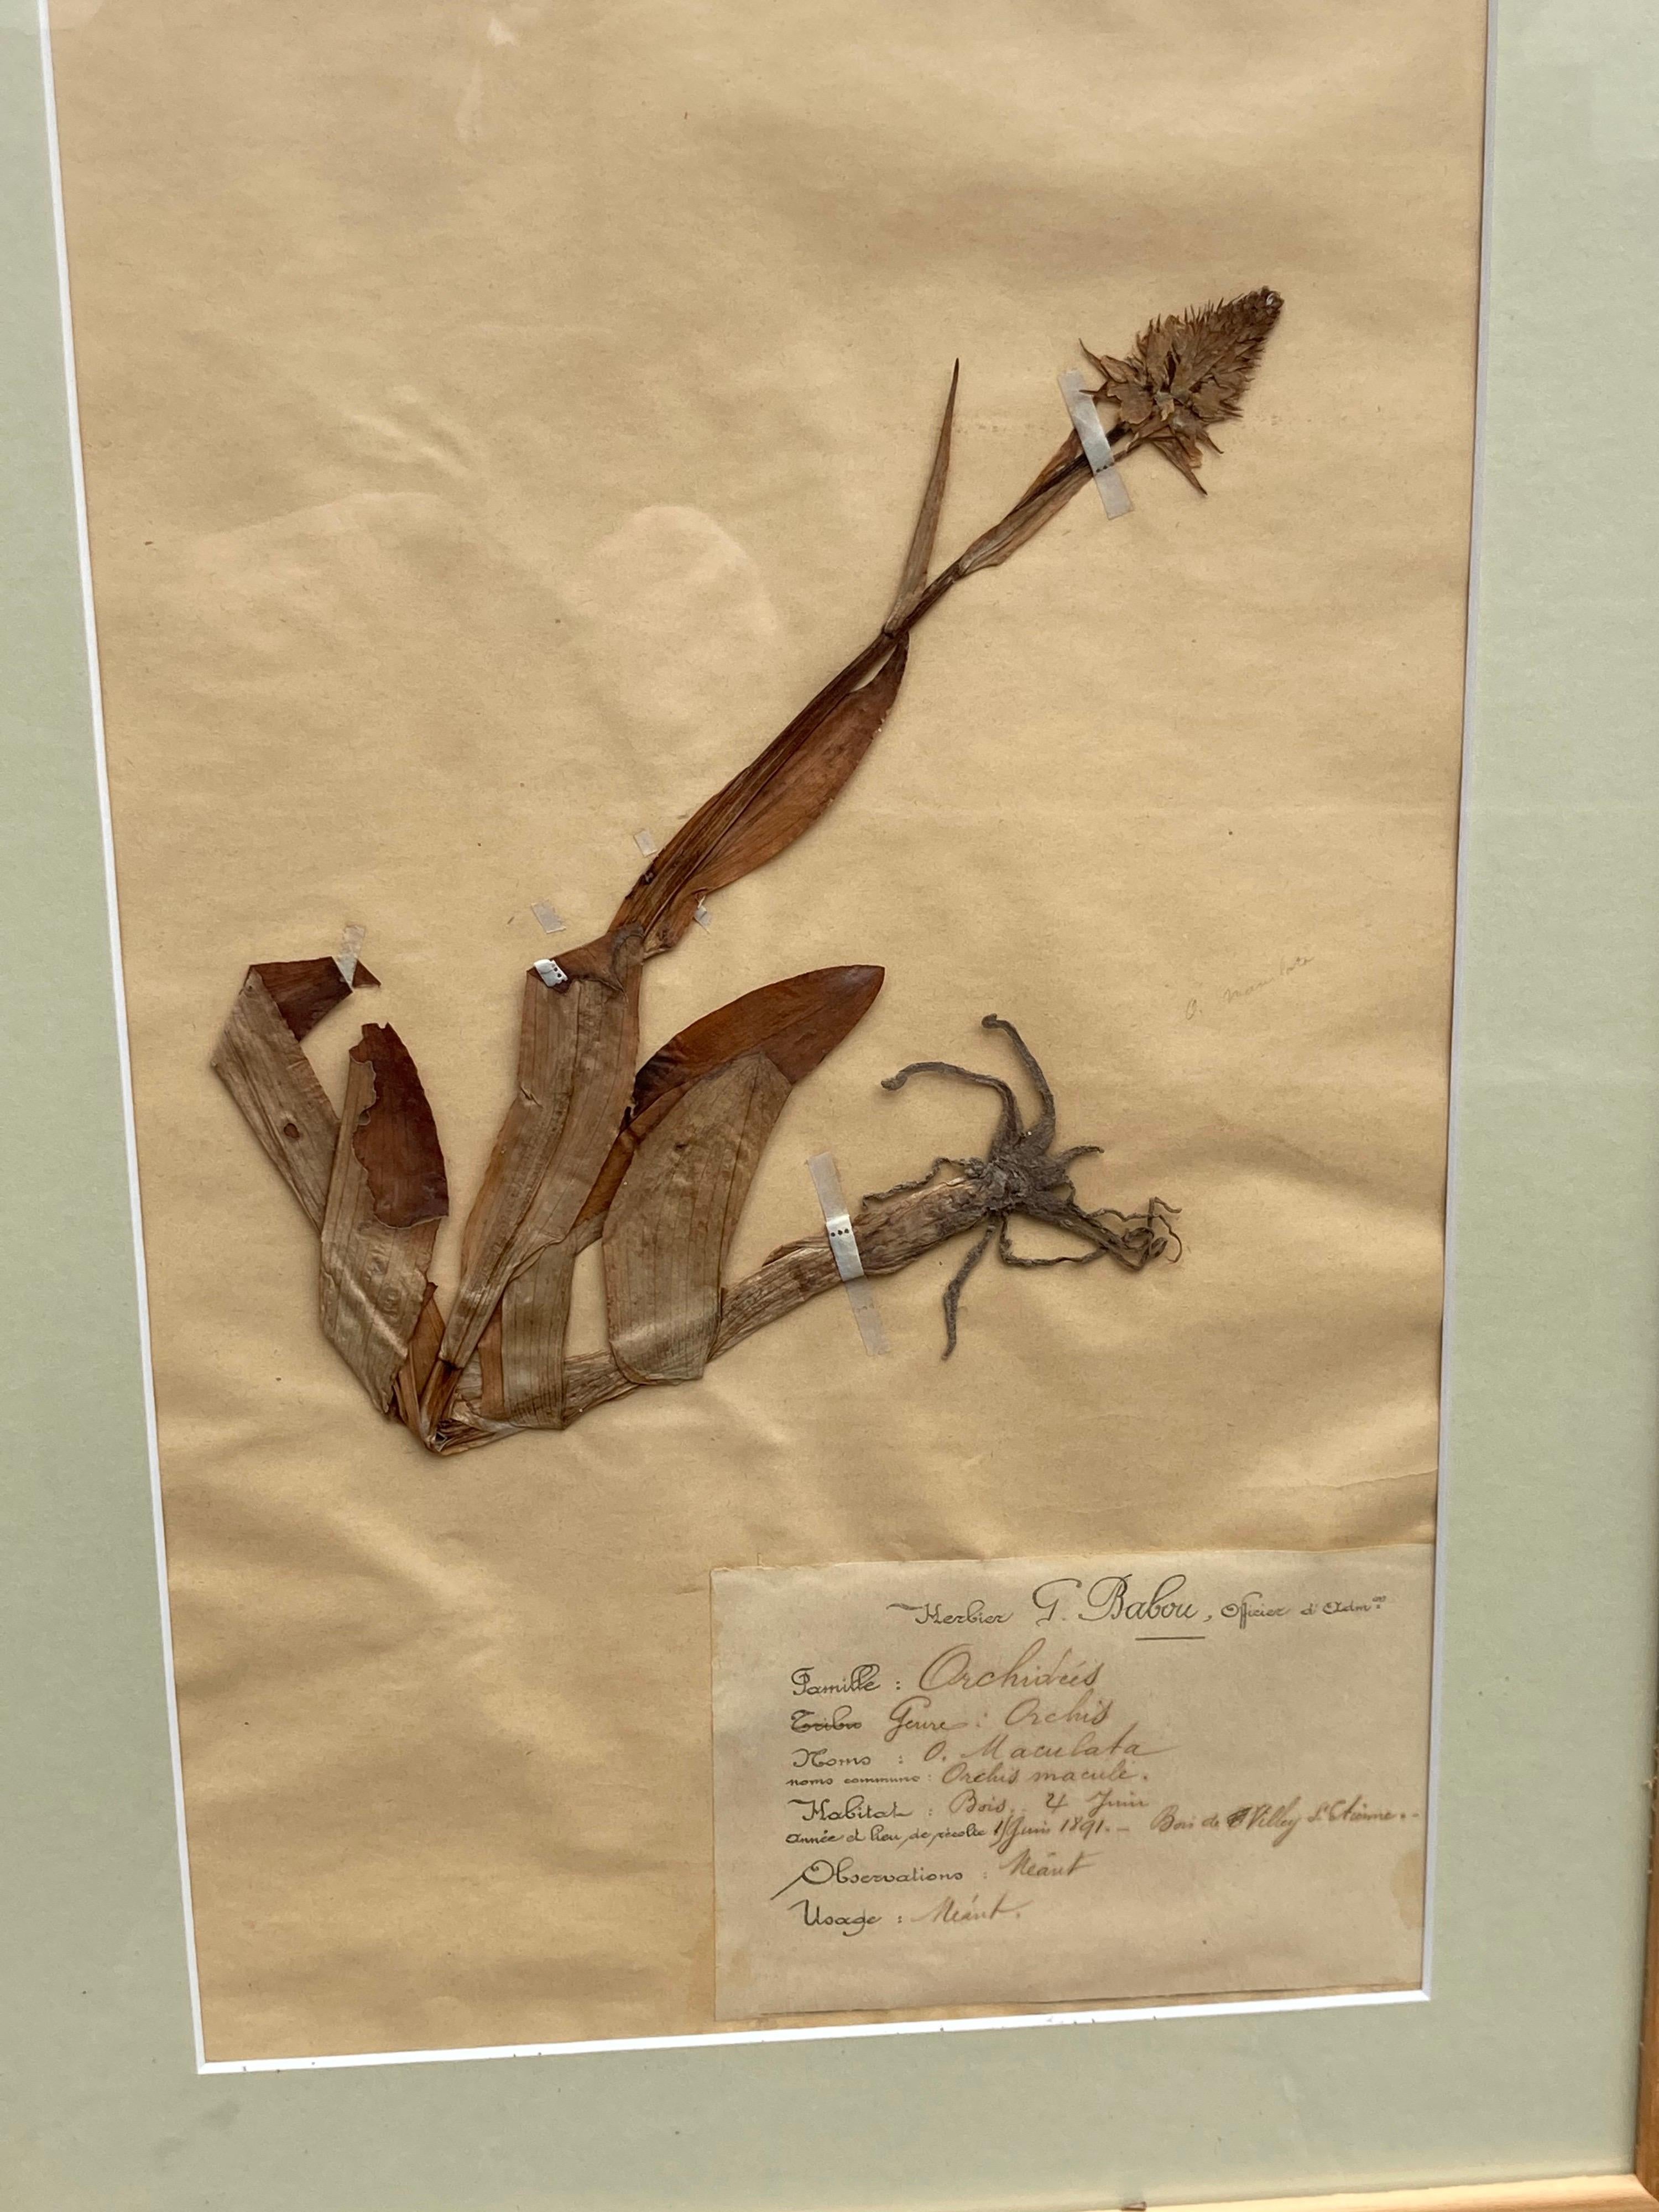 19th century French dried plant specimens... signed by G. Babou, dated, and meticulously catalogued including location in France.... a wonderful set of 15.